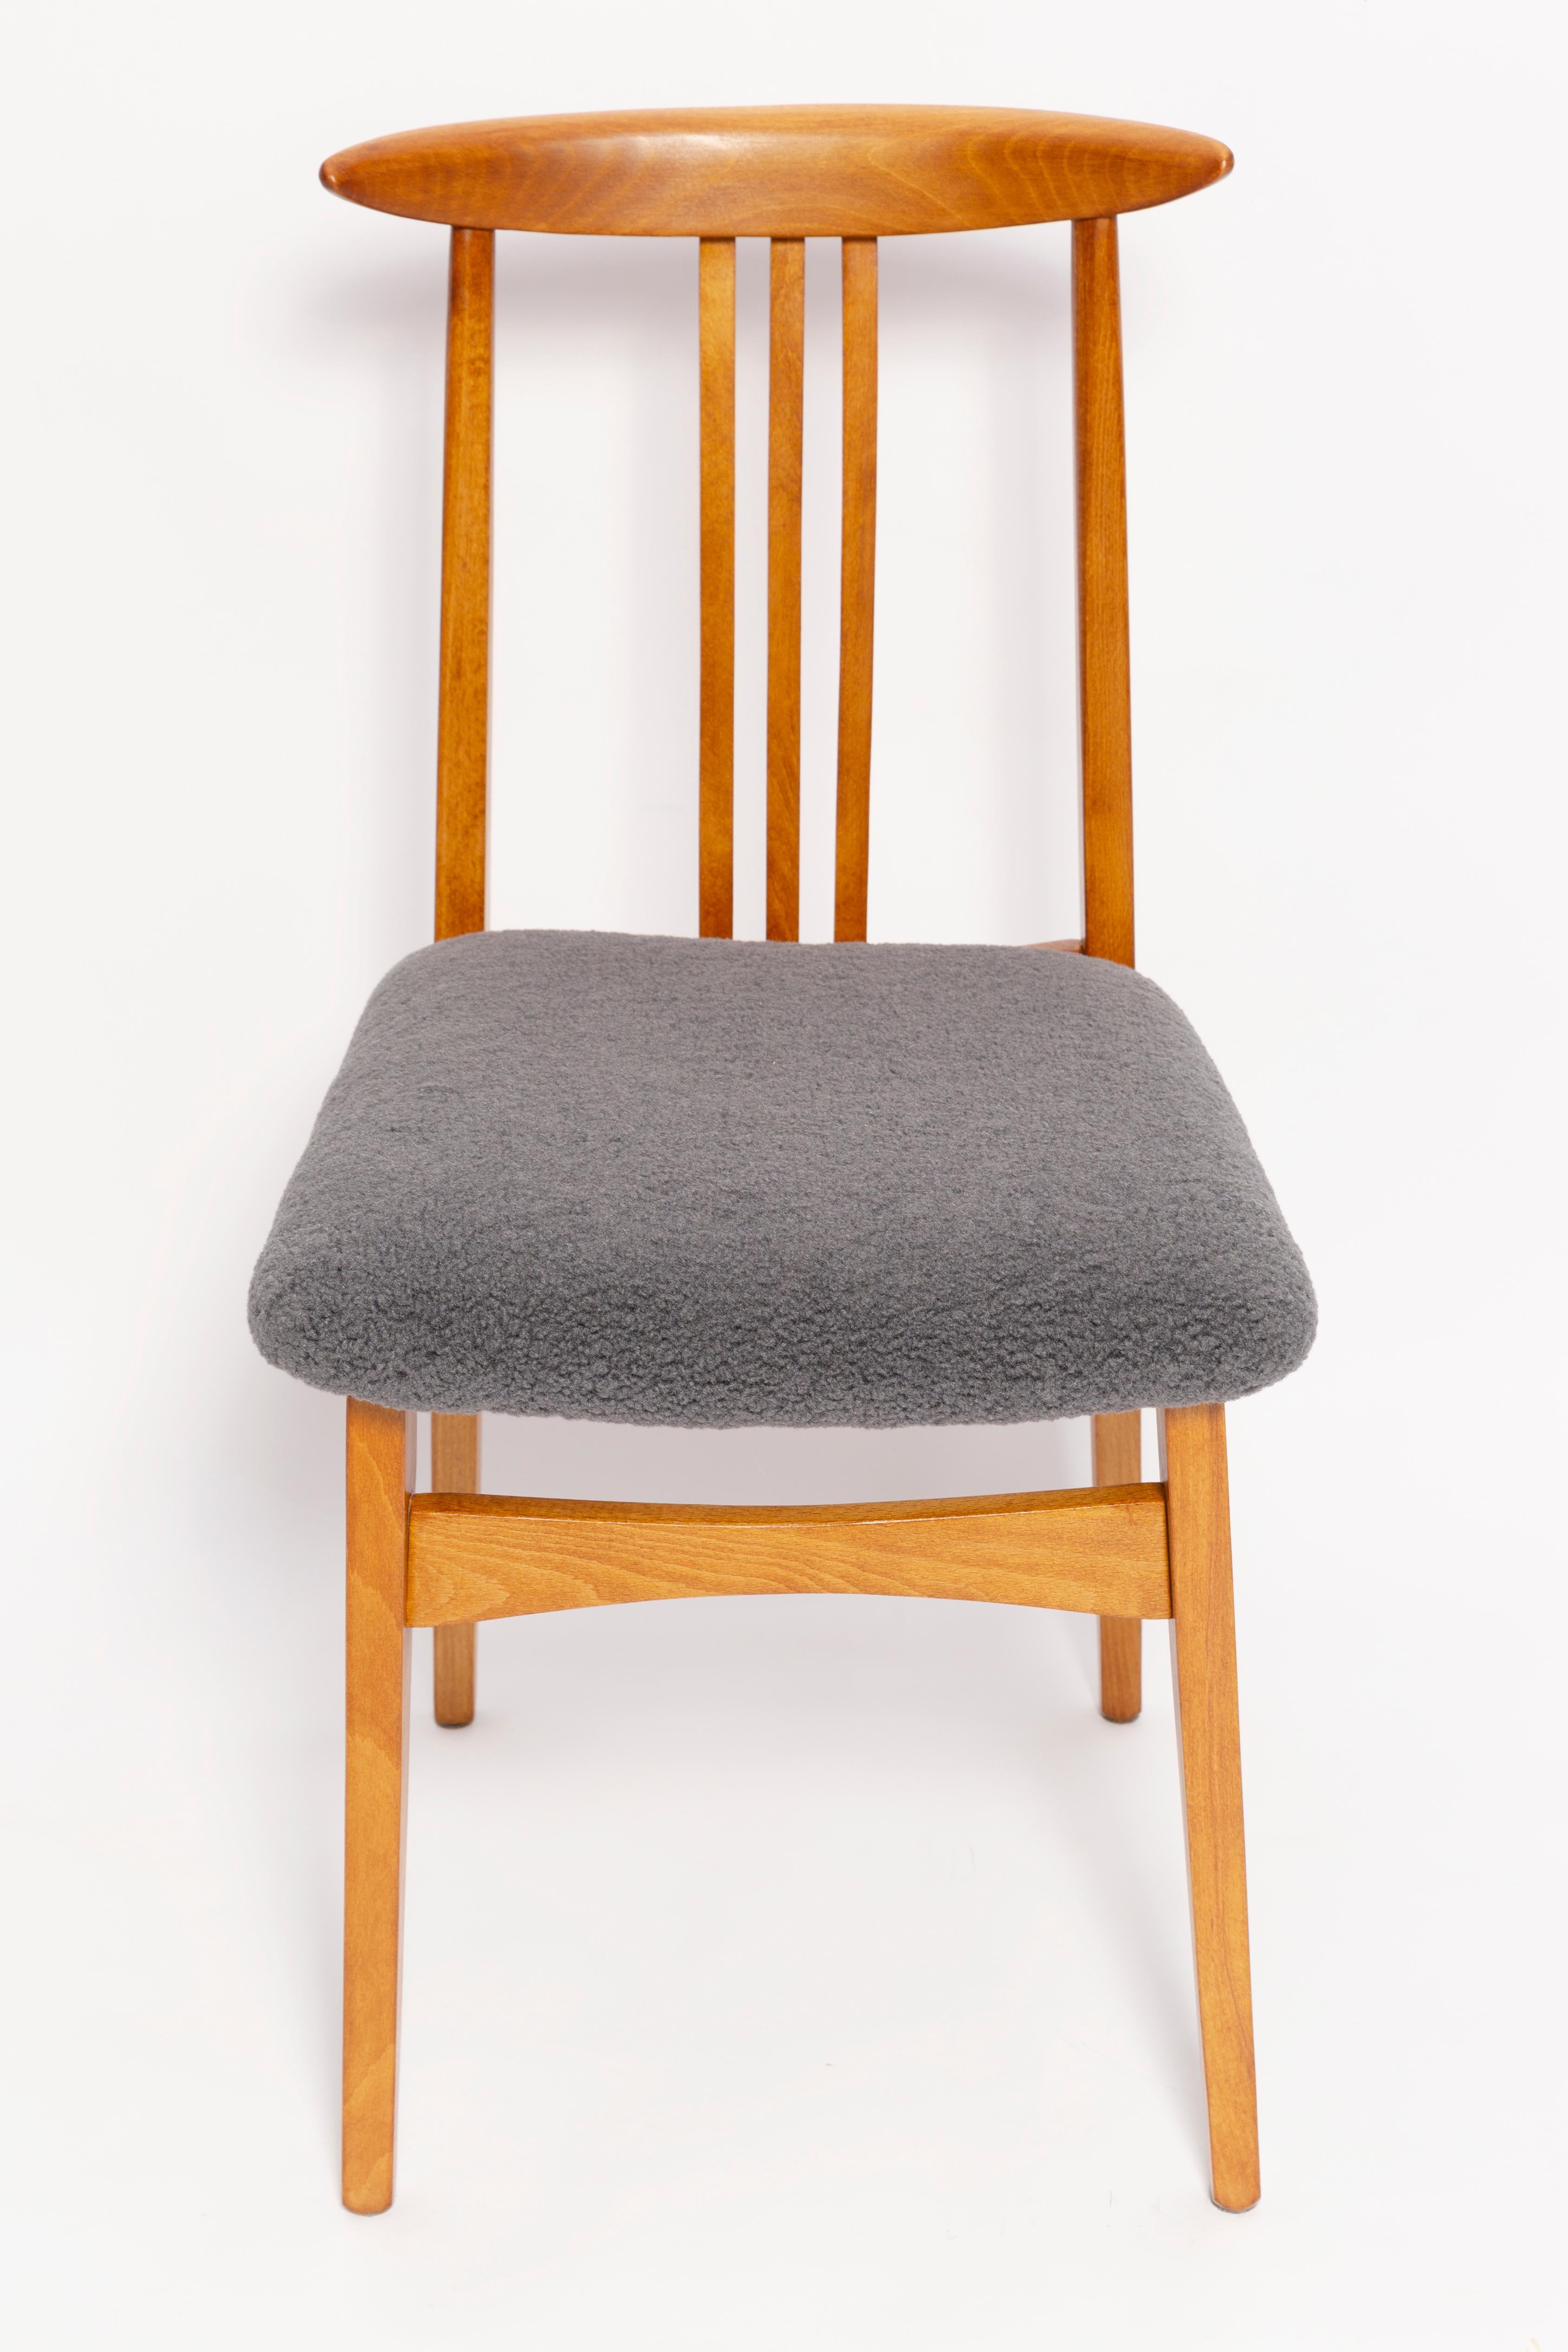 A beautiful beech chair designed by M. Zielinski, type 200 / 100B. Manufactured by the Opole Furniture Industry Center at the end of the 1960s in Poland. The chair is after undergone a complete carpentry and upholstery renovation. Seats covered with